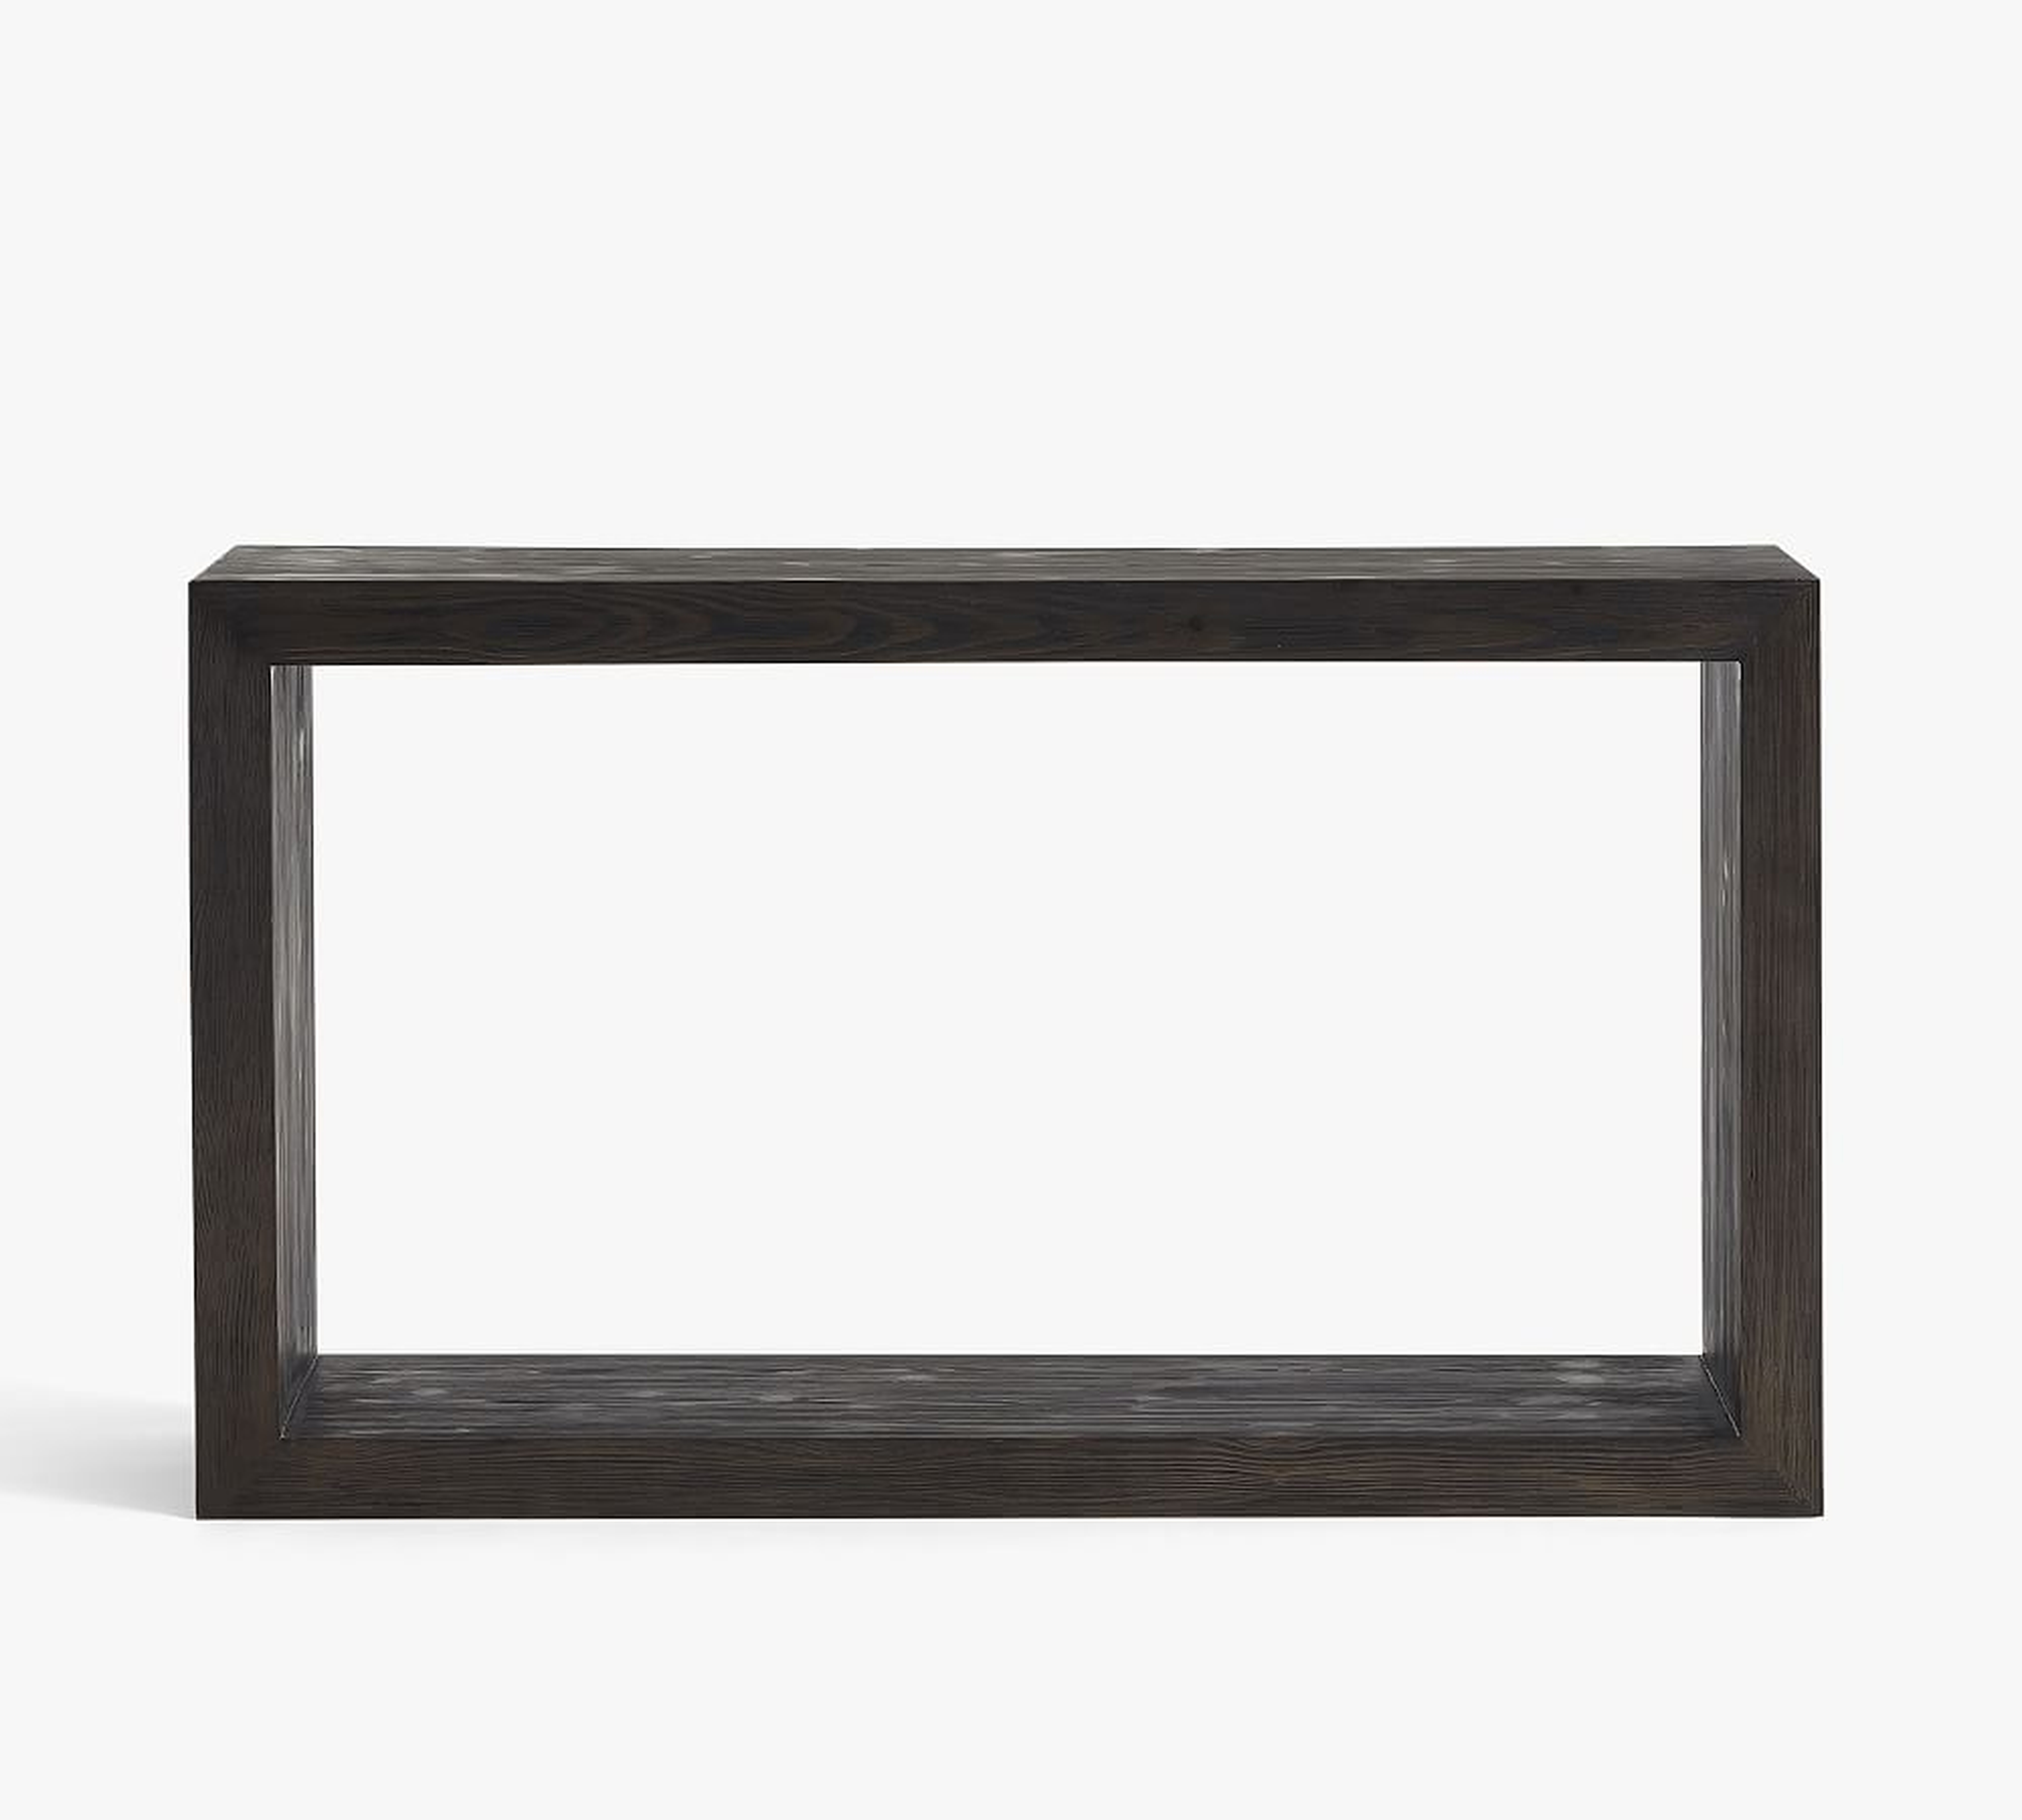 Folsom 52" Open Console Table, Charcoal - Pottery Barn